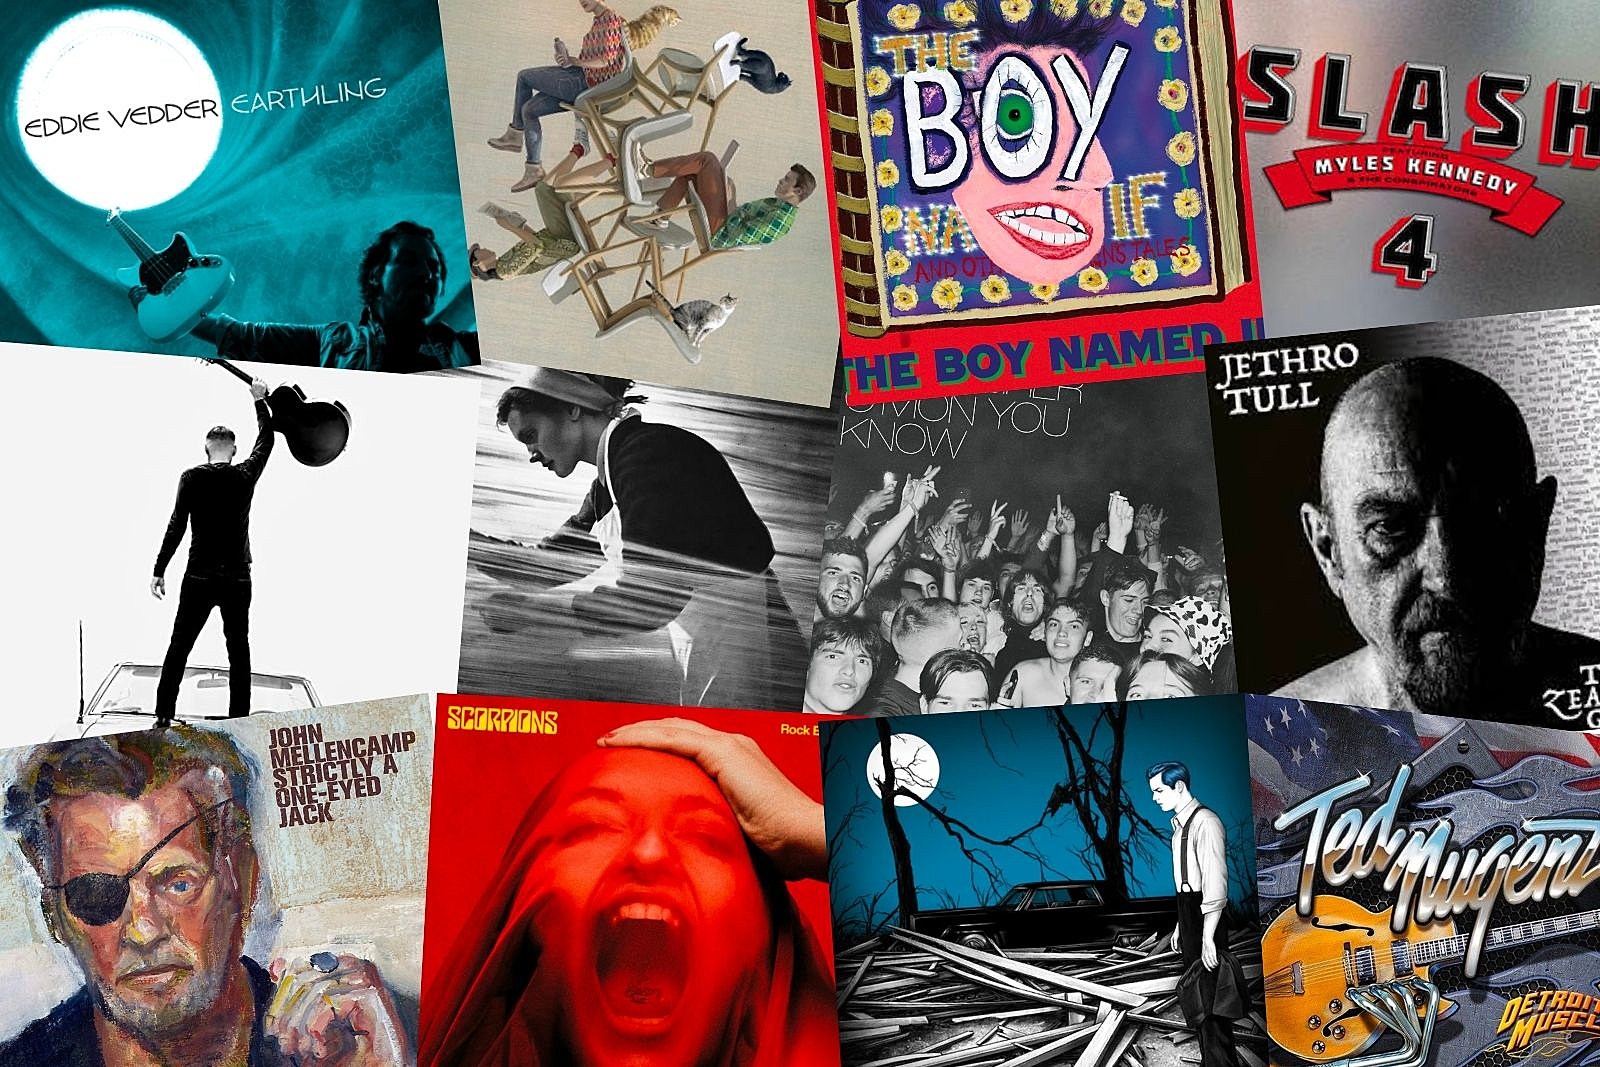 The Best Rock Albums Of All Time 100 Essential Records vlr.eng.br